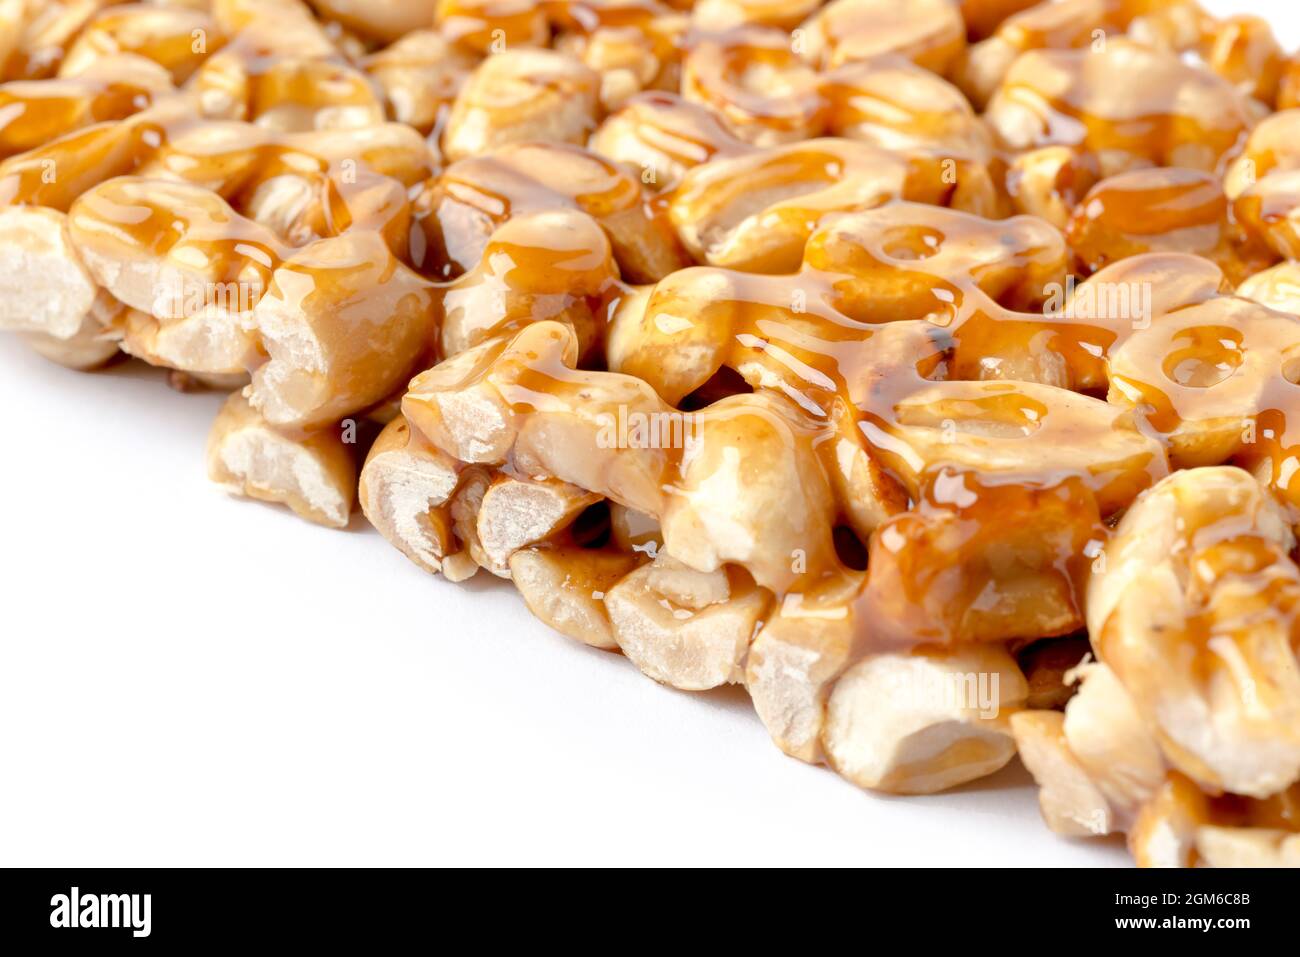 Palanqueta with peanuts crunchy. Mexican artisanal candies produced by hand using the traditional craftsmanship Stock Photo